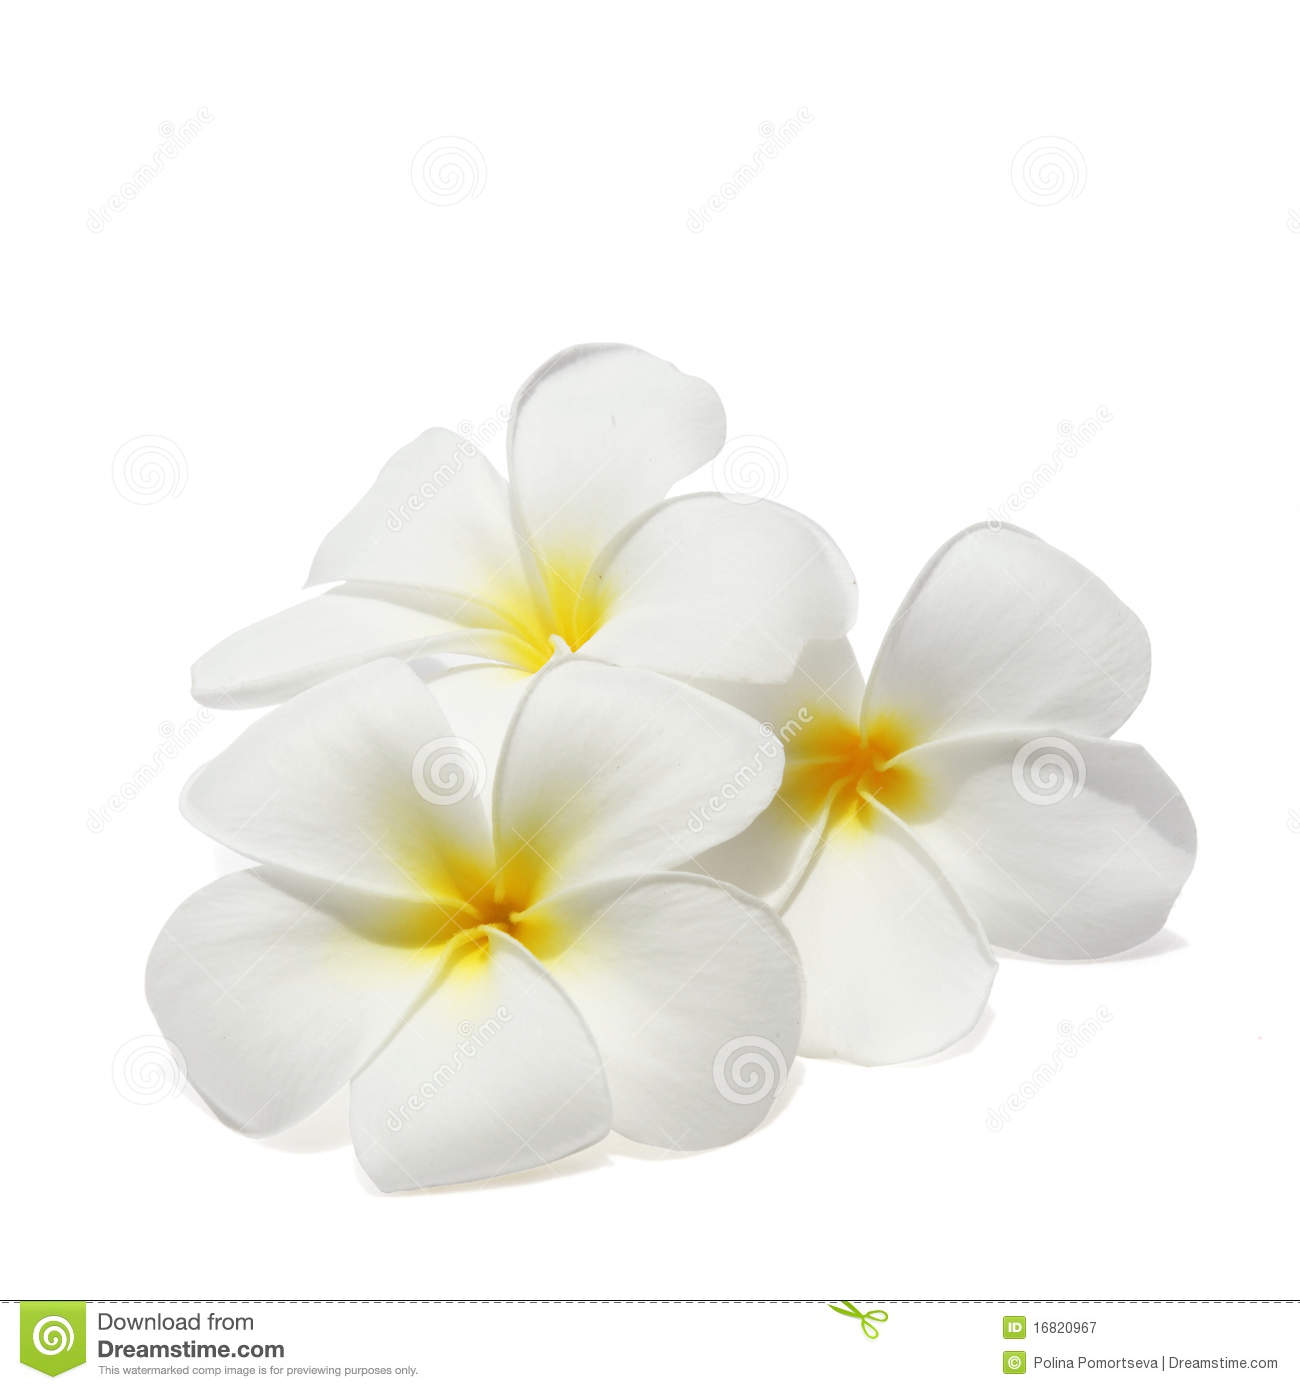 Tropical Flowers Frangipani Isolated On White Royalty Free Stock